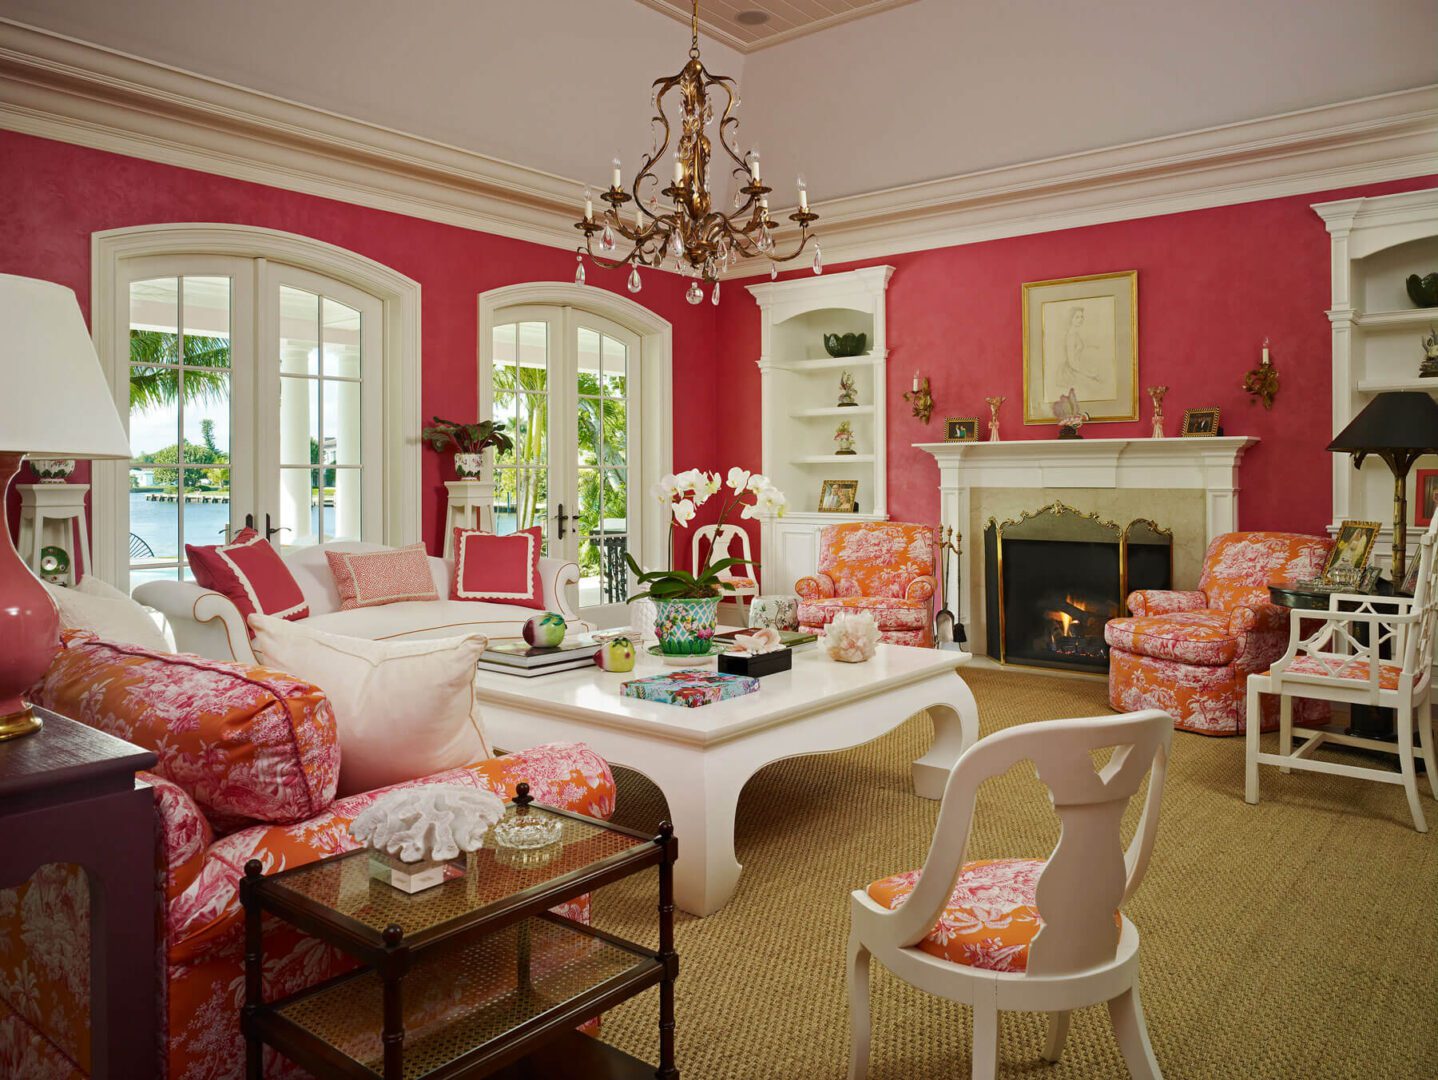 A living room with red walls and white furniture.